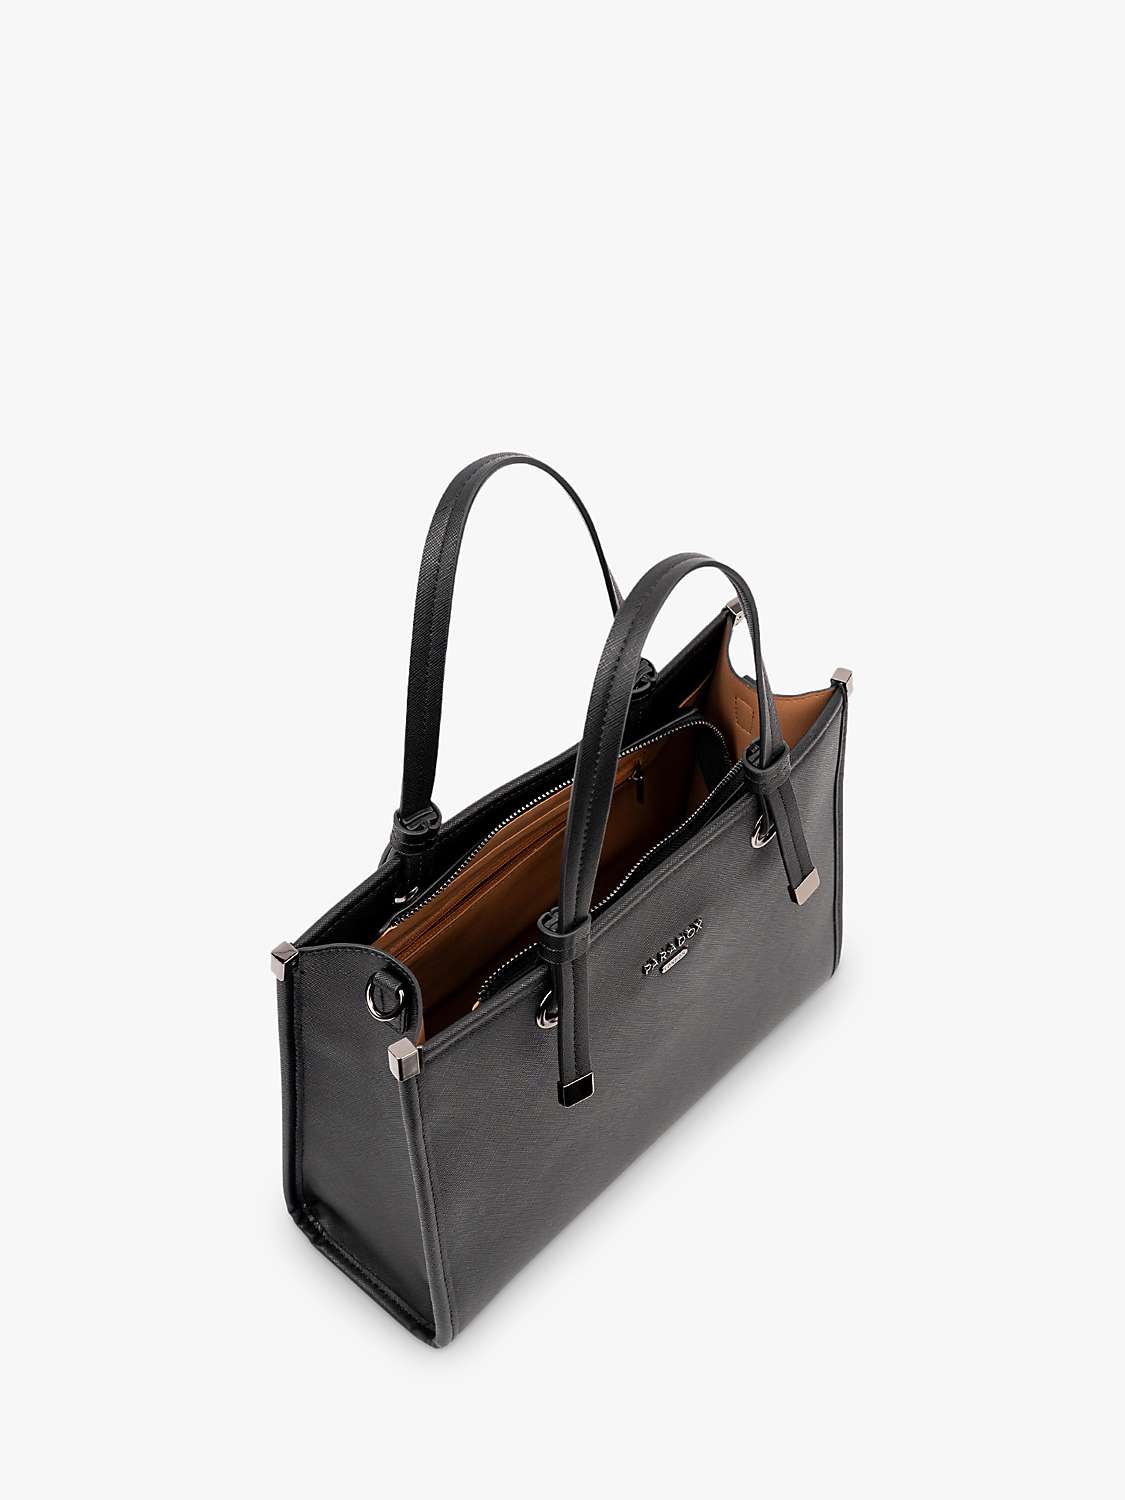 Buy Paradox London Oceana Faux Leather Tote Bag Online at johnlewis.com